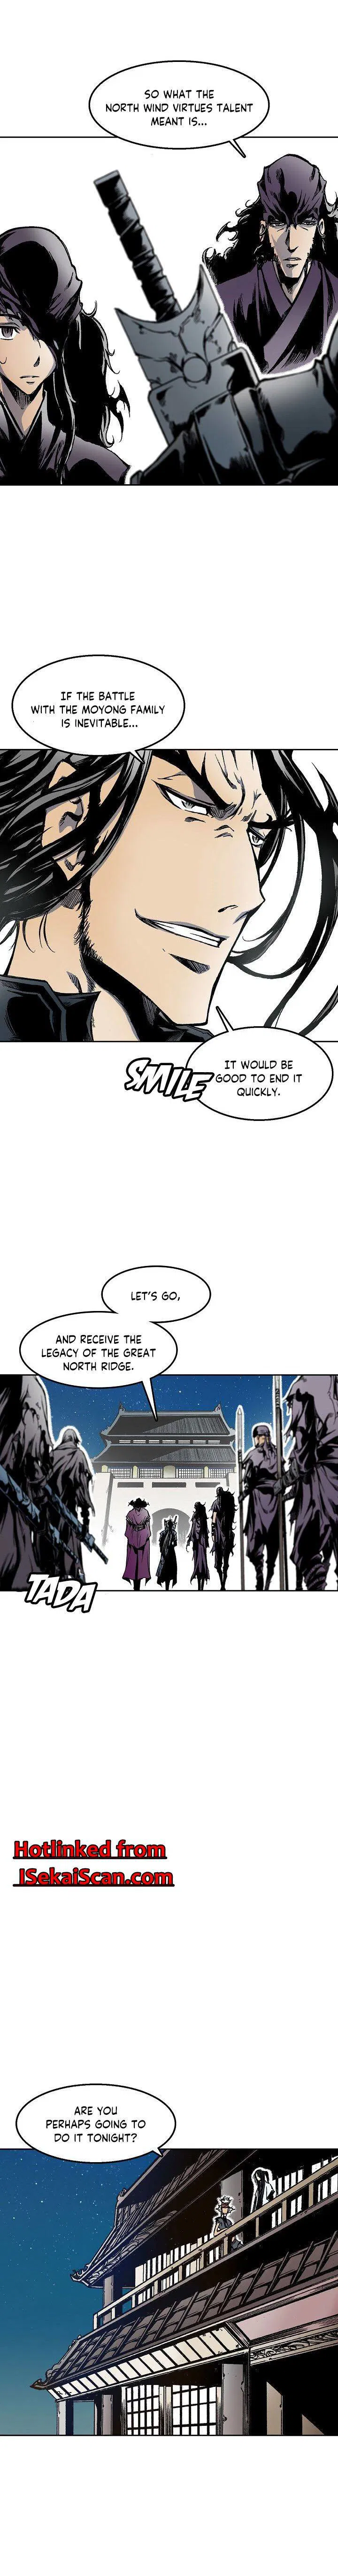 Memoir Of The King Of War Chapter 30 page 7